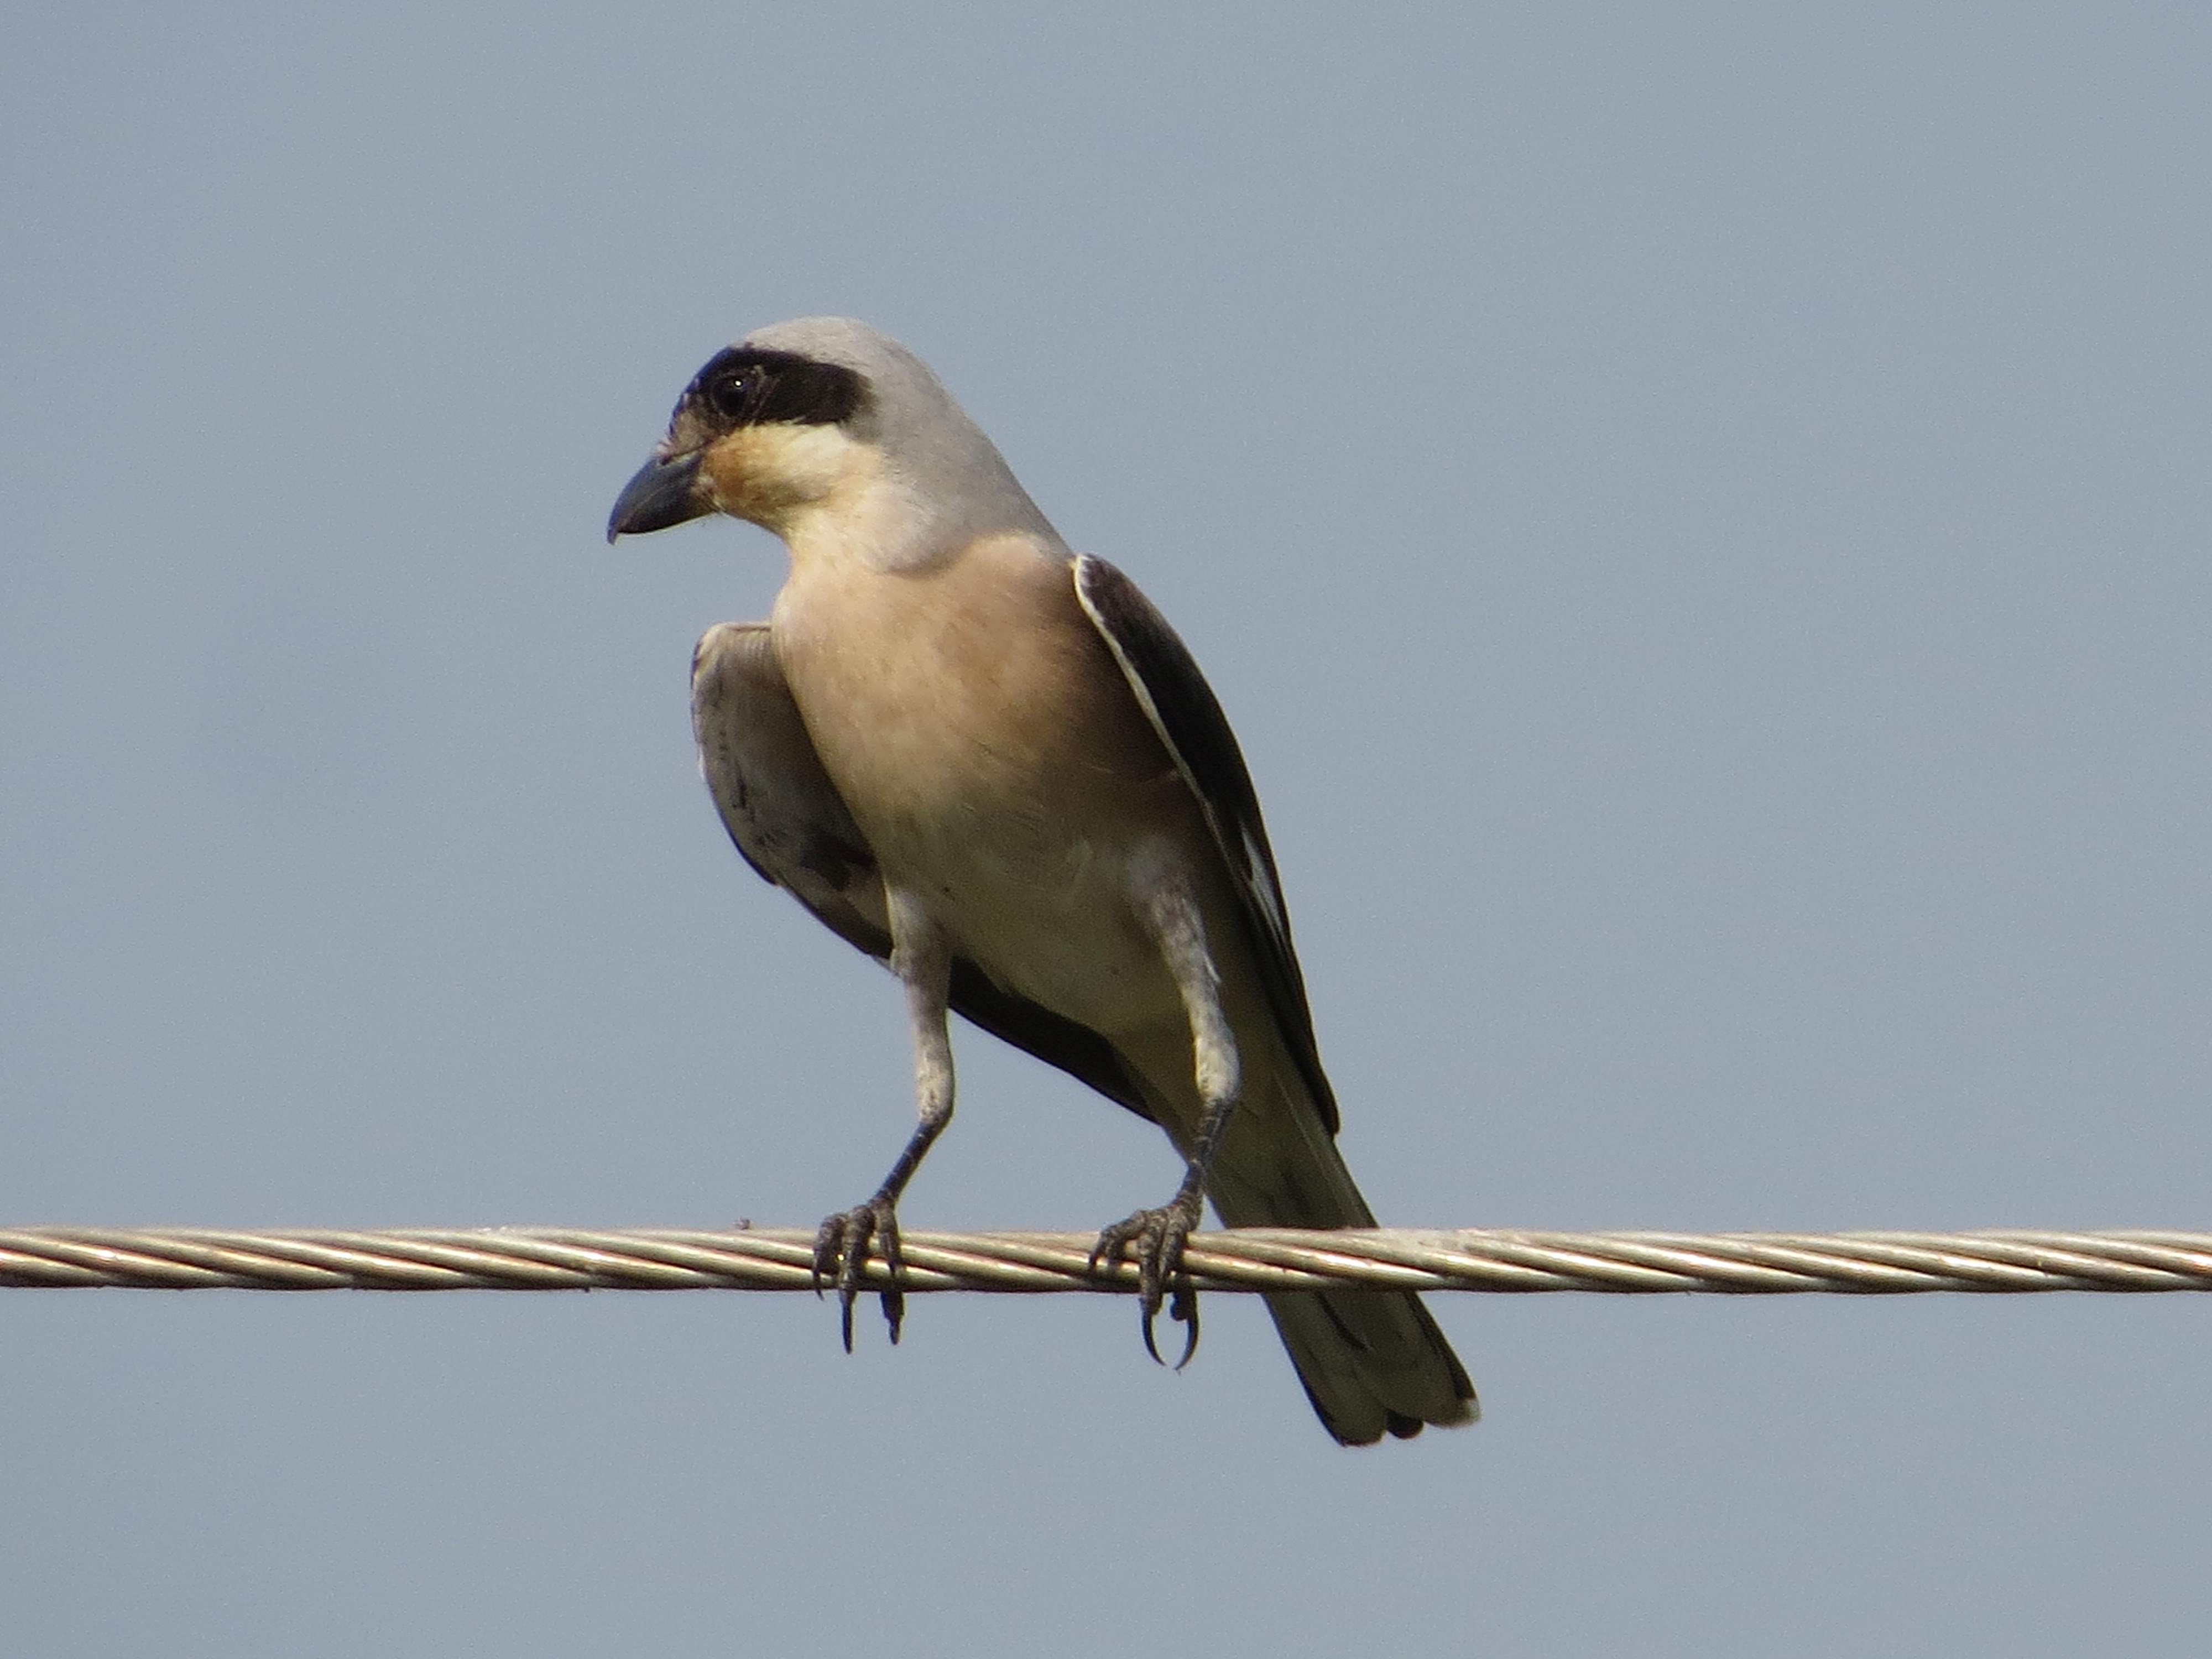 The Lesser Grey Shrike was observed collecting ants from the ground and feeding on the nearby electric transmission line